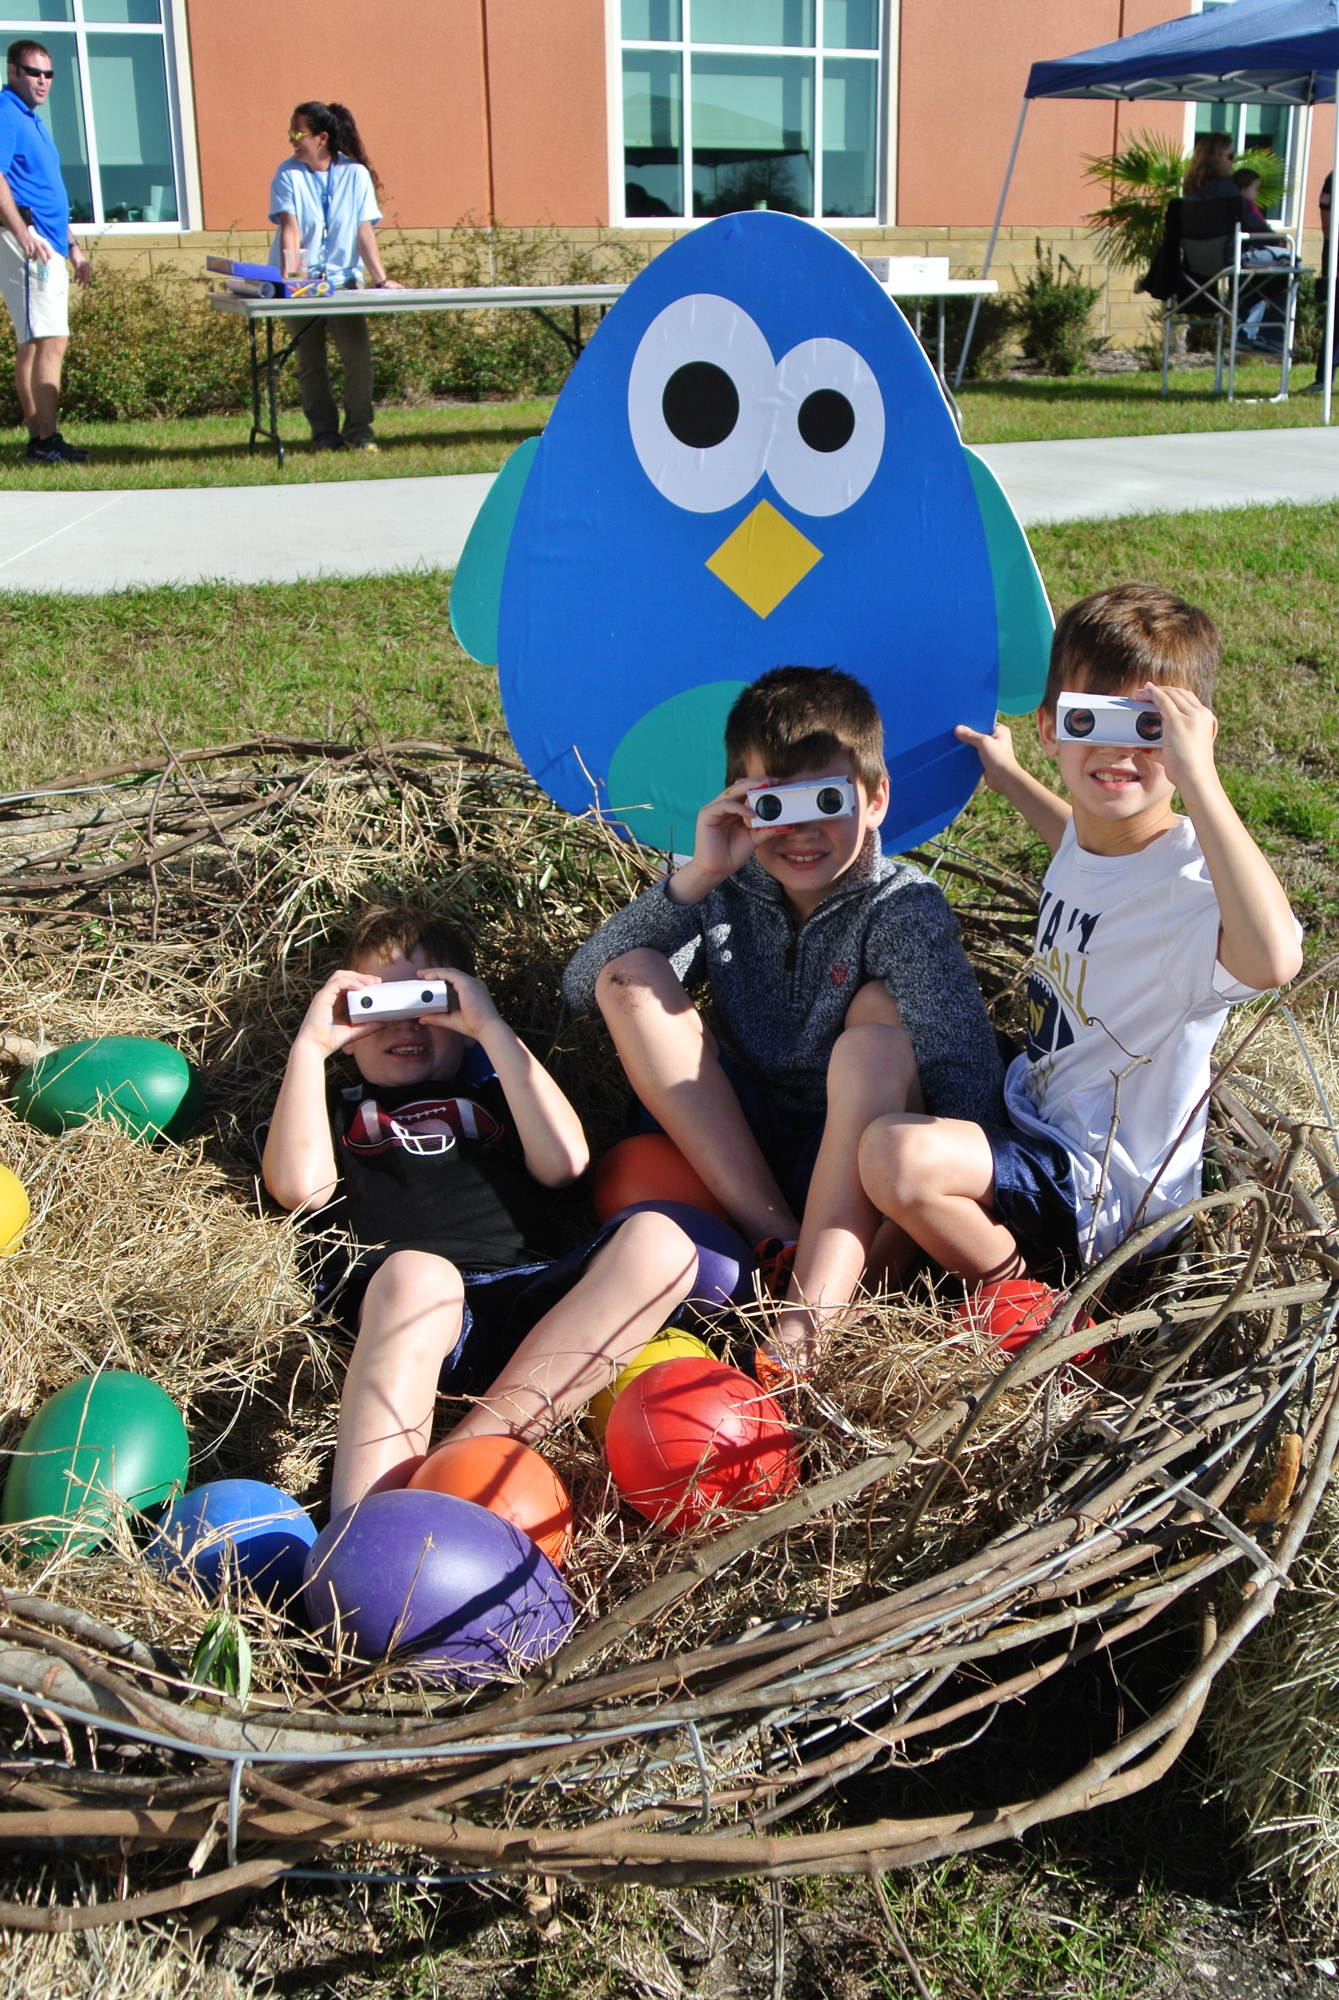 Children aim their binoculars while playing in the eagle’s nest at the 2017 Birds of a Feather Fest at Palm Coast City Hall. Photo courtesy of Cindi Lane